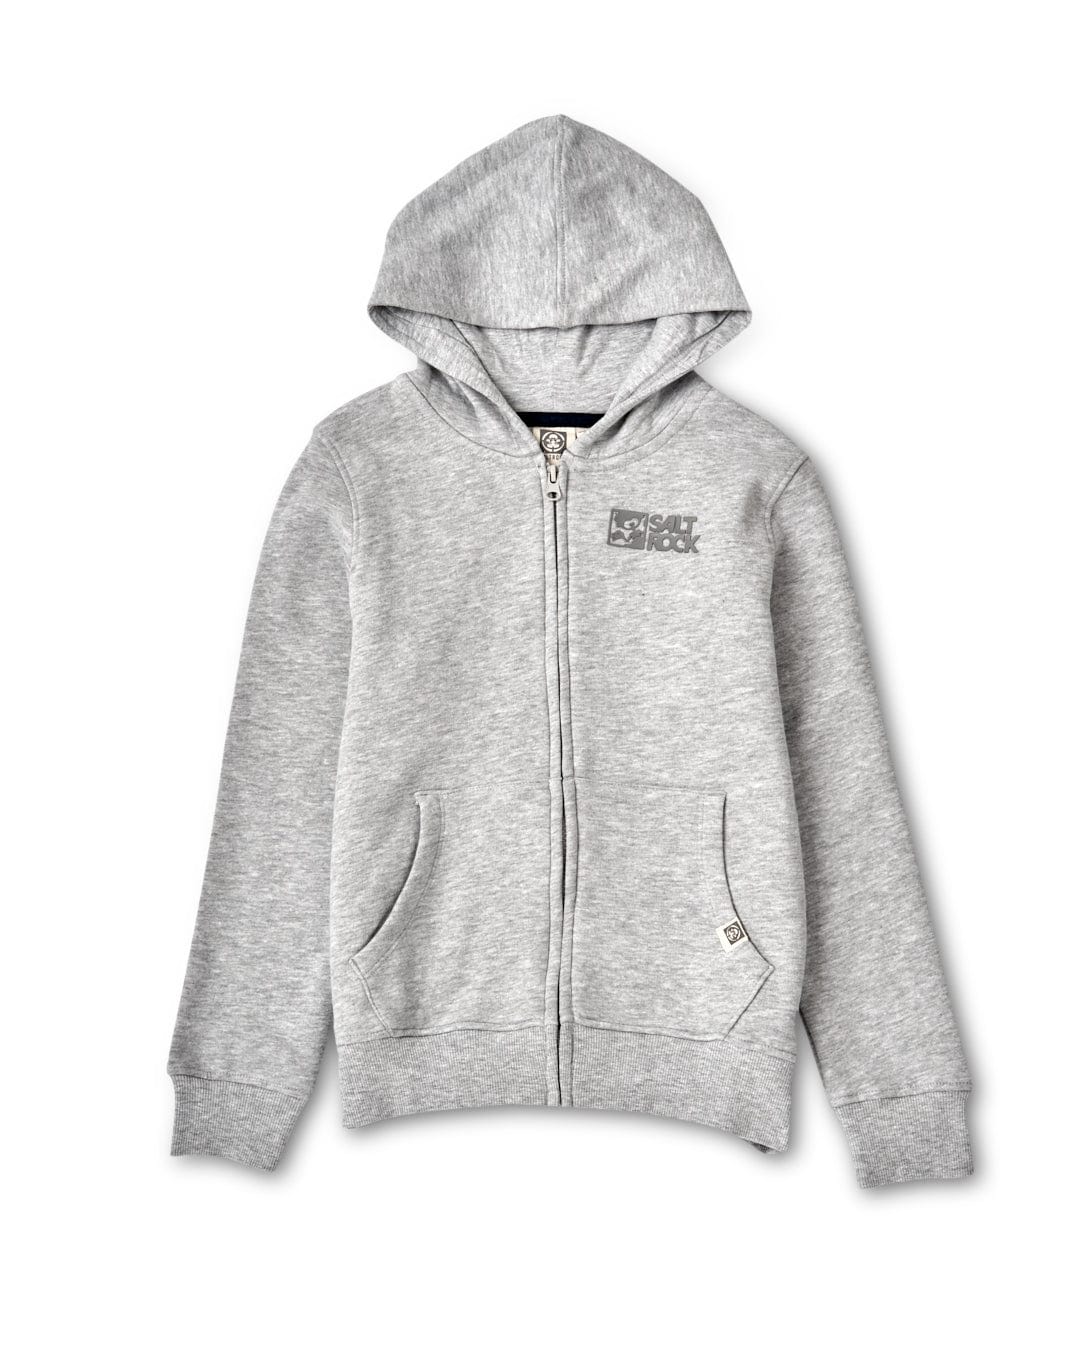 Grey marl zip-up hoodie with a hood, featuring small Tok Corp branding on the chest and near the hem, displayed against a white background.